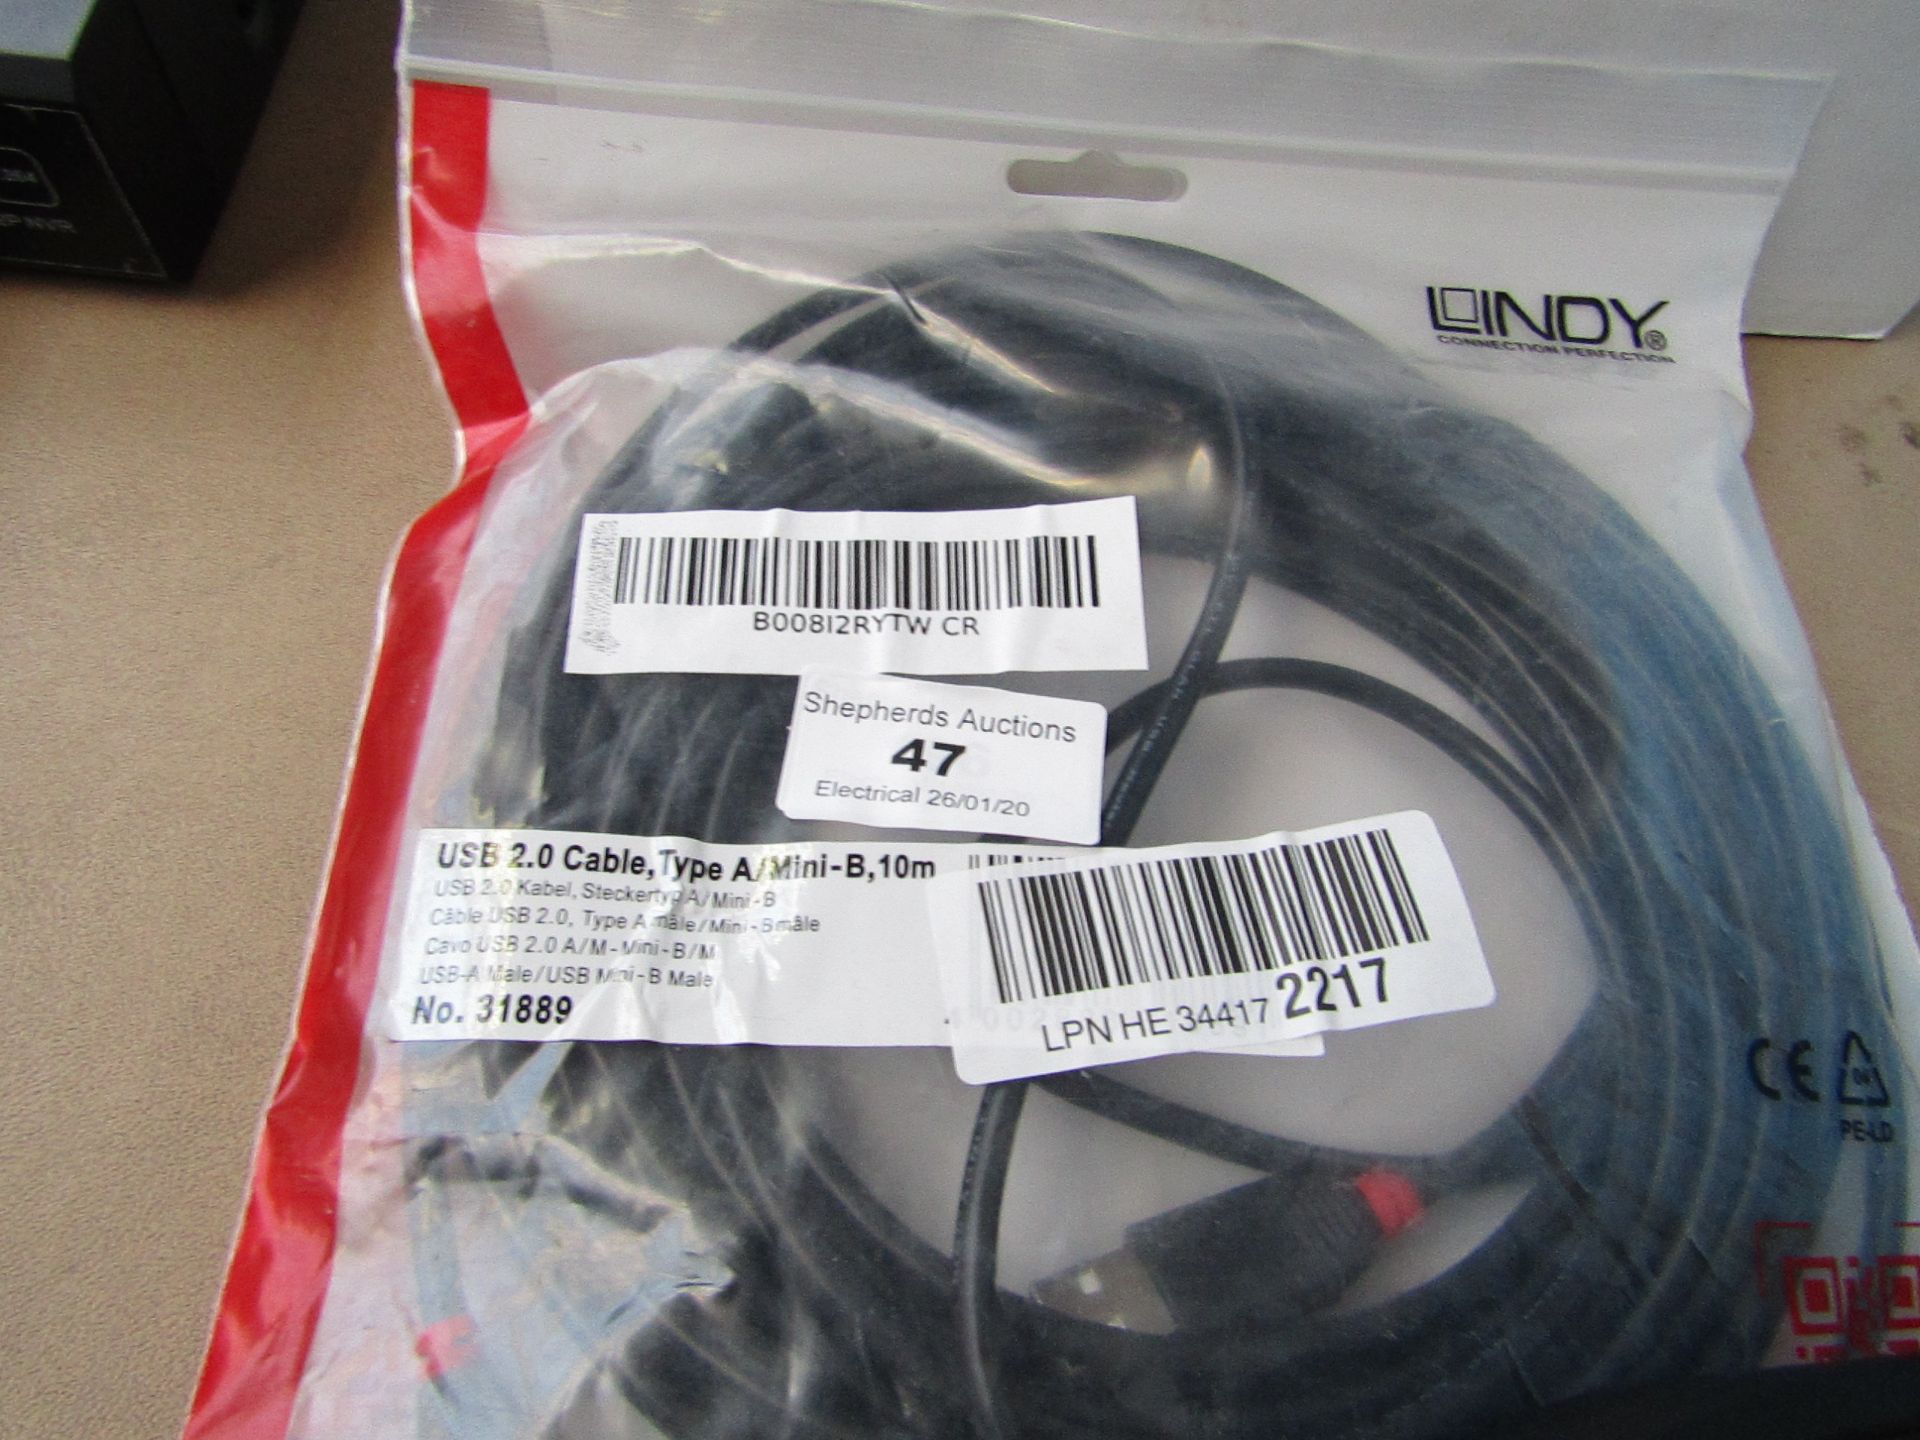 LINDY - USB 2.0 Cable Type A/Mini-B 10M - Unchecked and packaged.